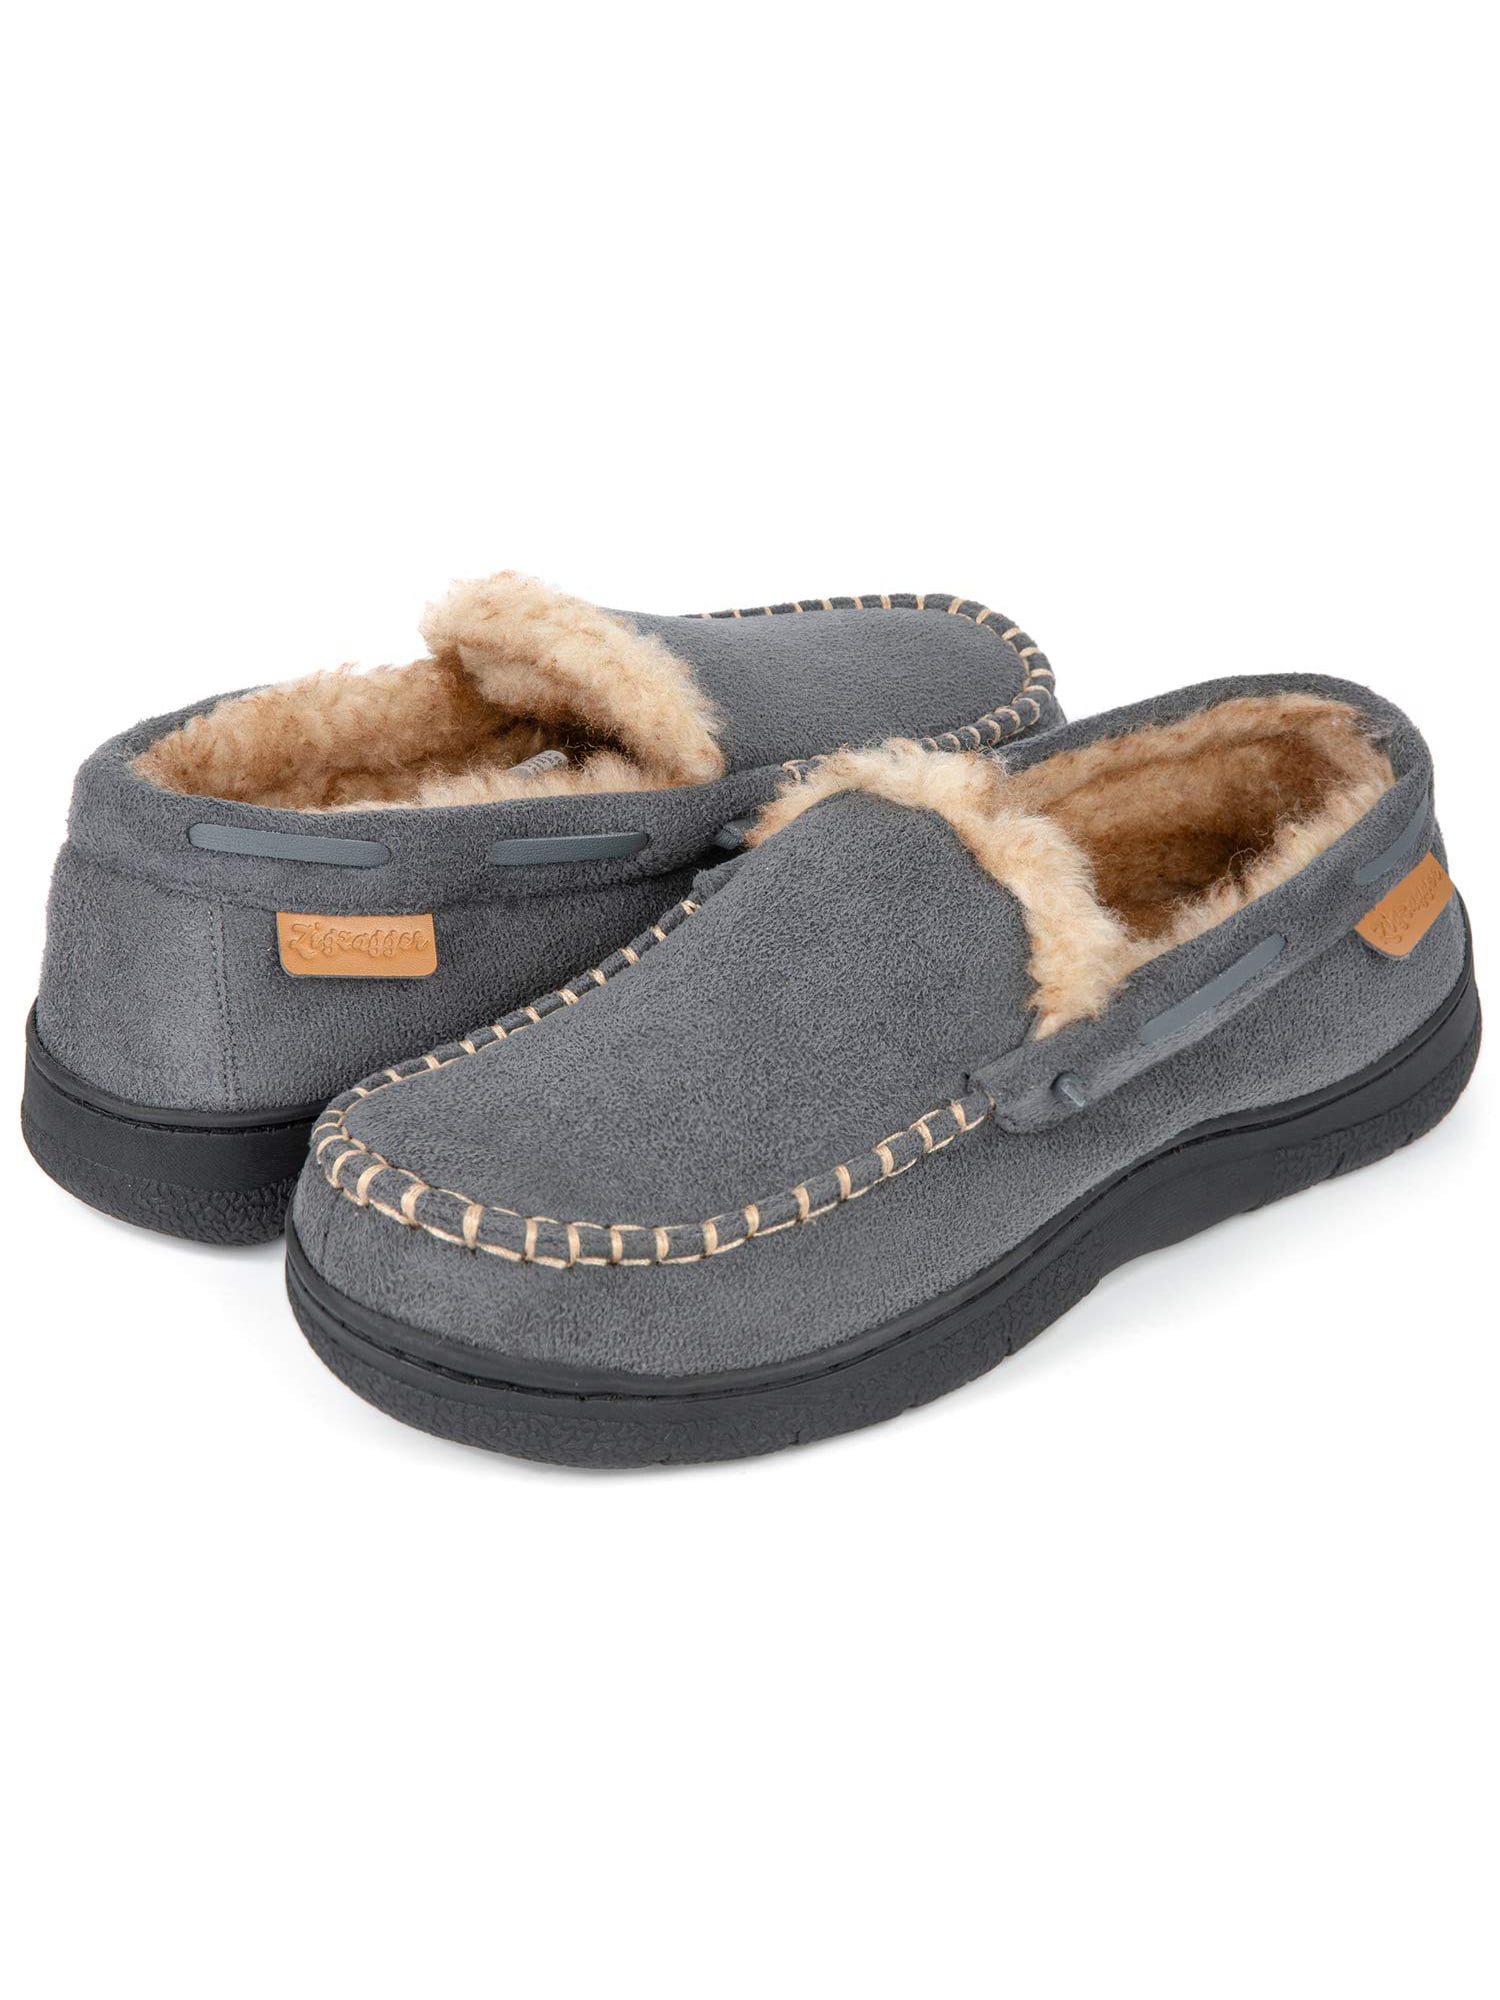 moccasin house shoes